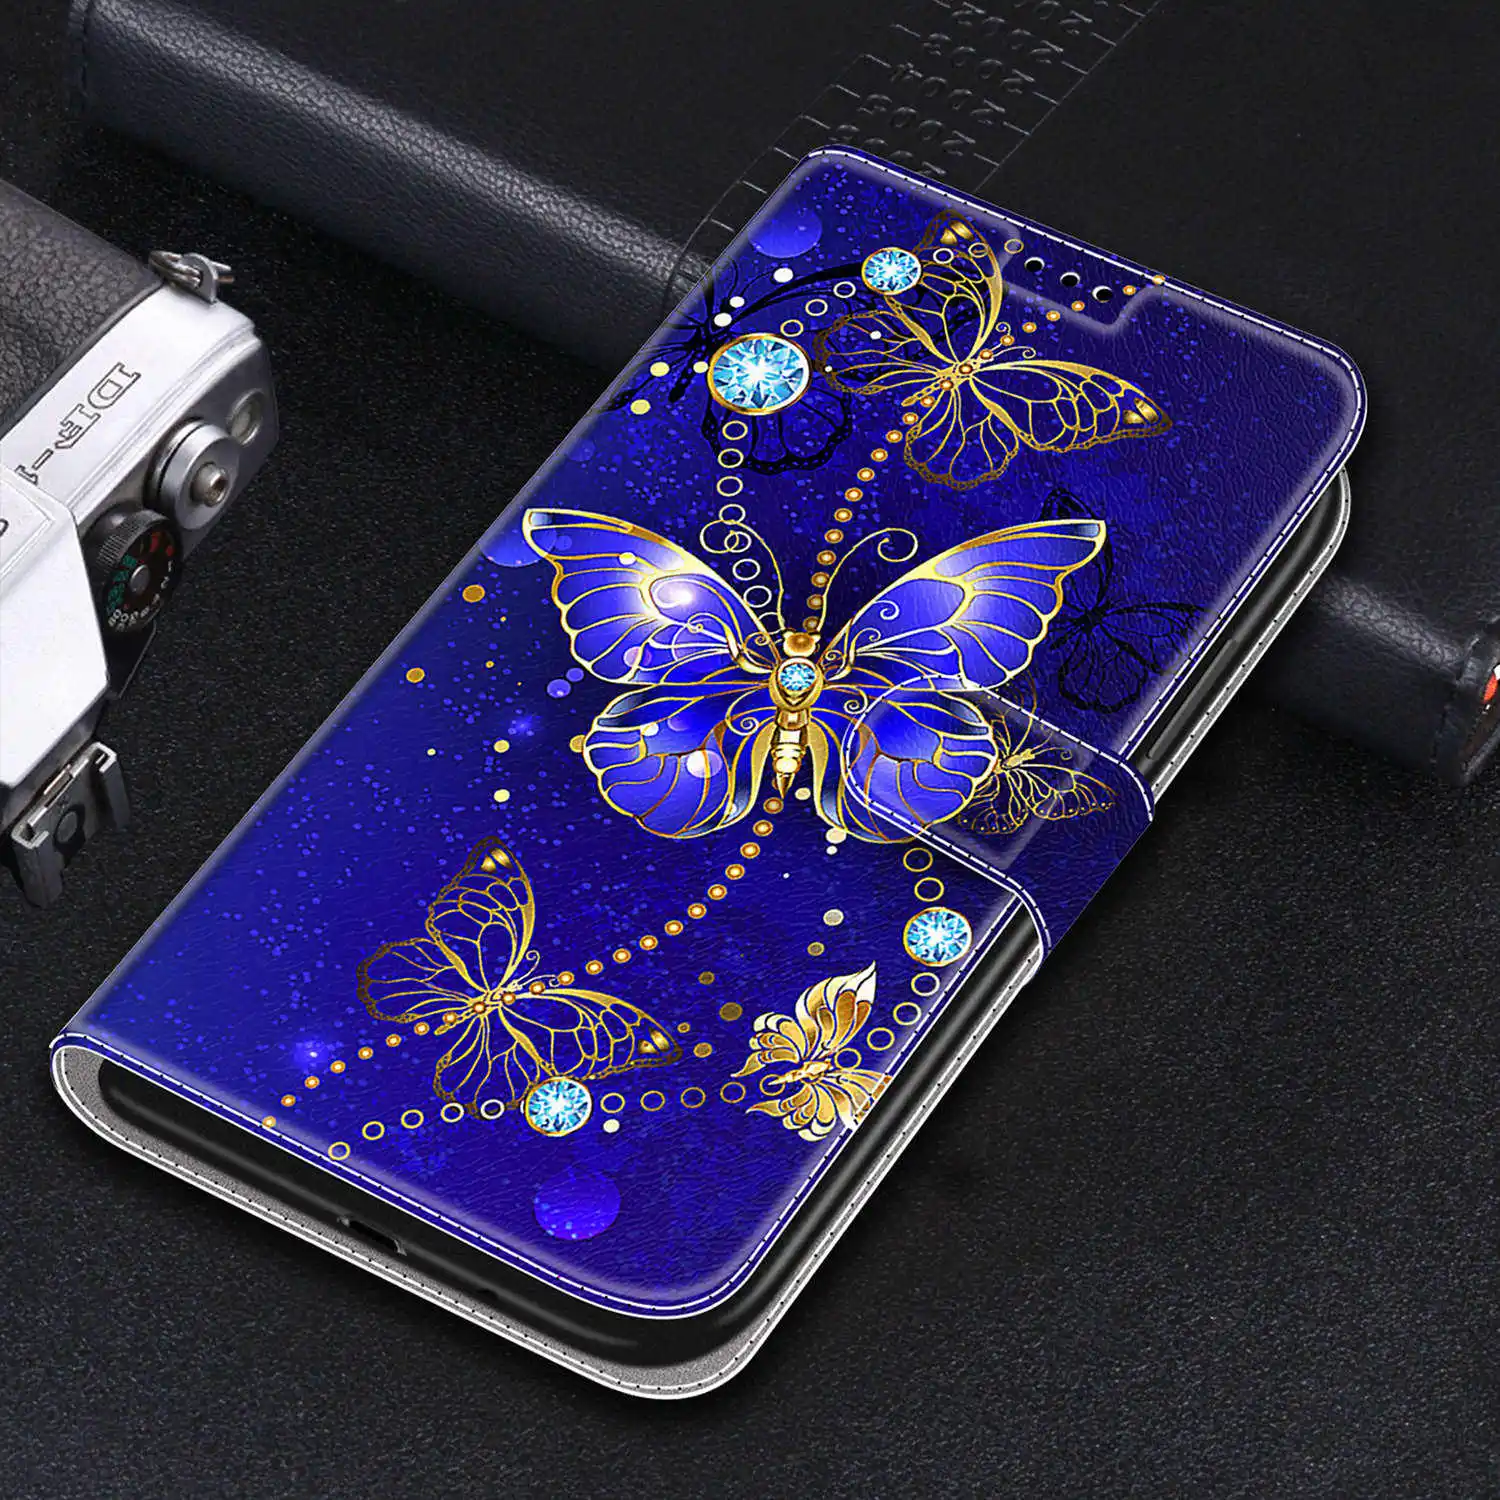 p smart z stk lx1 leather flip case on sfor coque huawei p smart 2021 psmart 2019 pot lx1 luxury stand phone wallet cover etui free global shipping